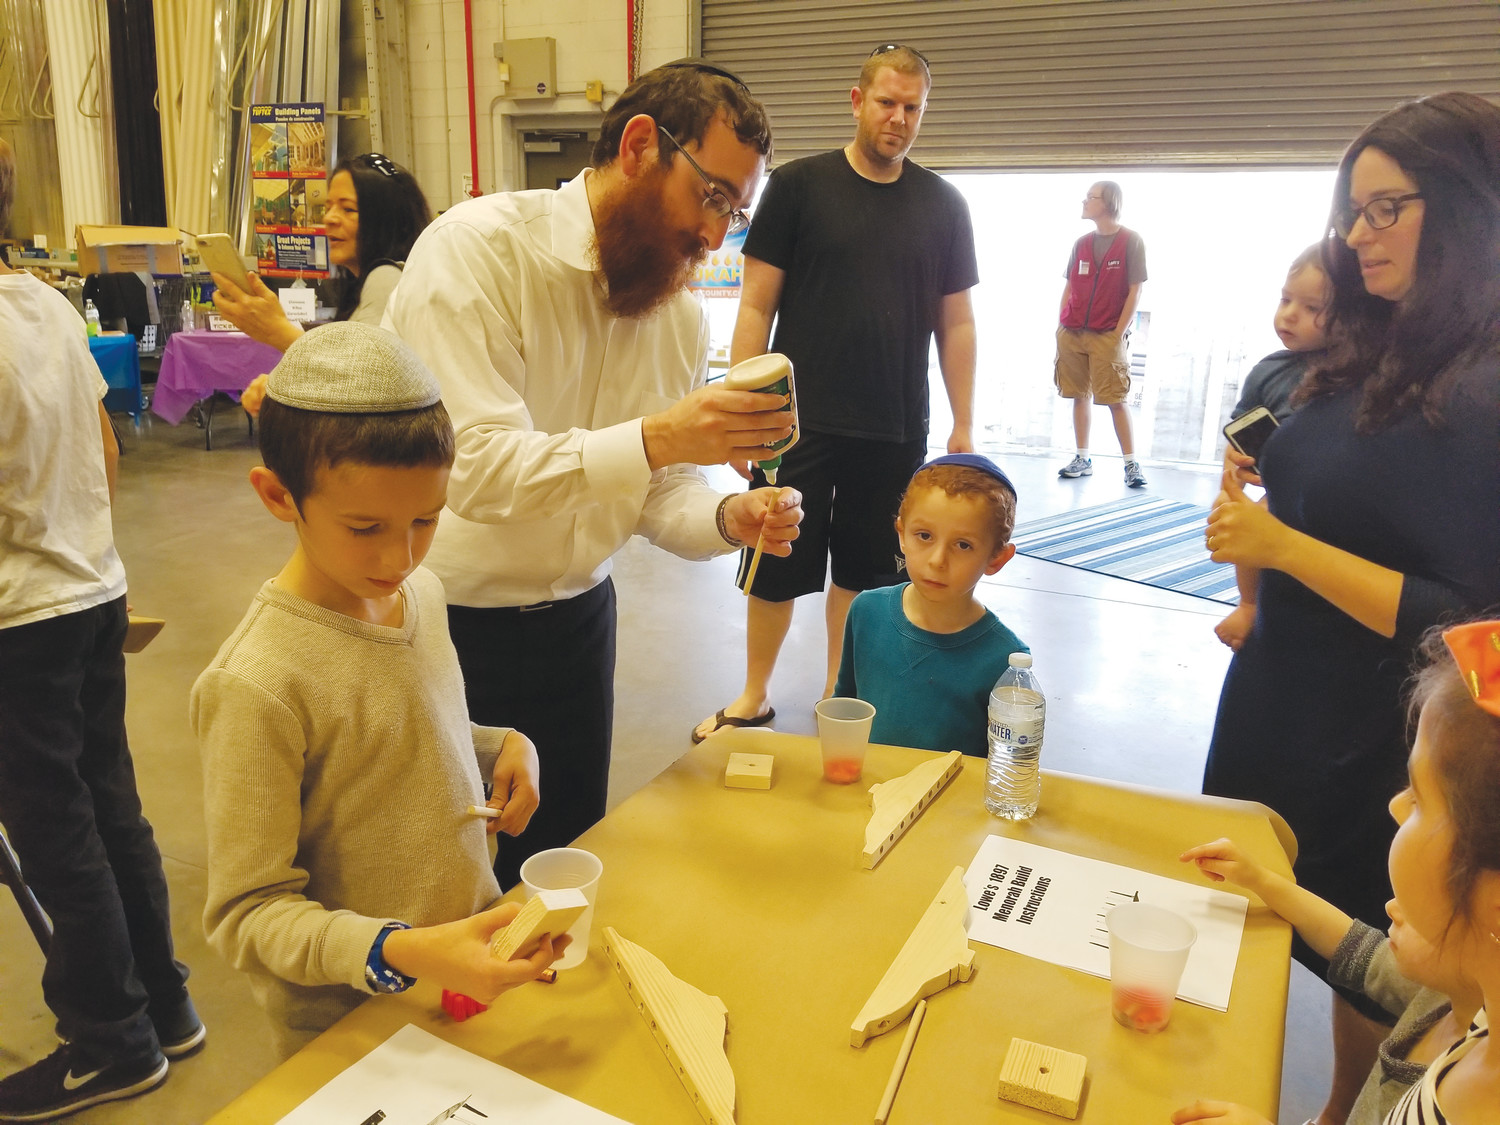 Rabbi Shmuly Feldman, second from left, assists children with making menorahs in preparation for the annual celebration of Hanukkah at a workshop held Dec. 2 at Lowe’s on Kingsley Avenue.